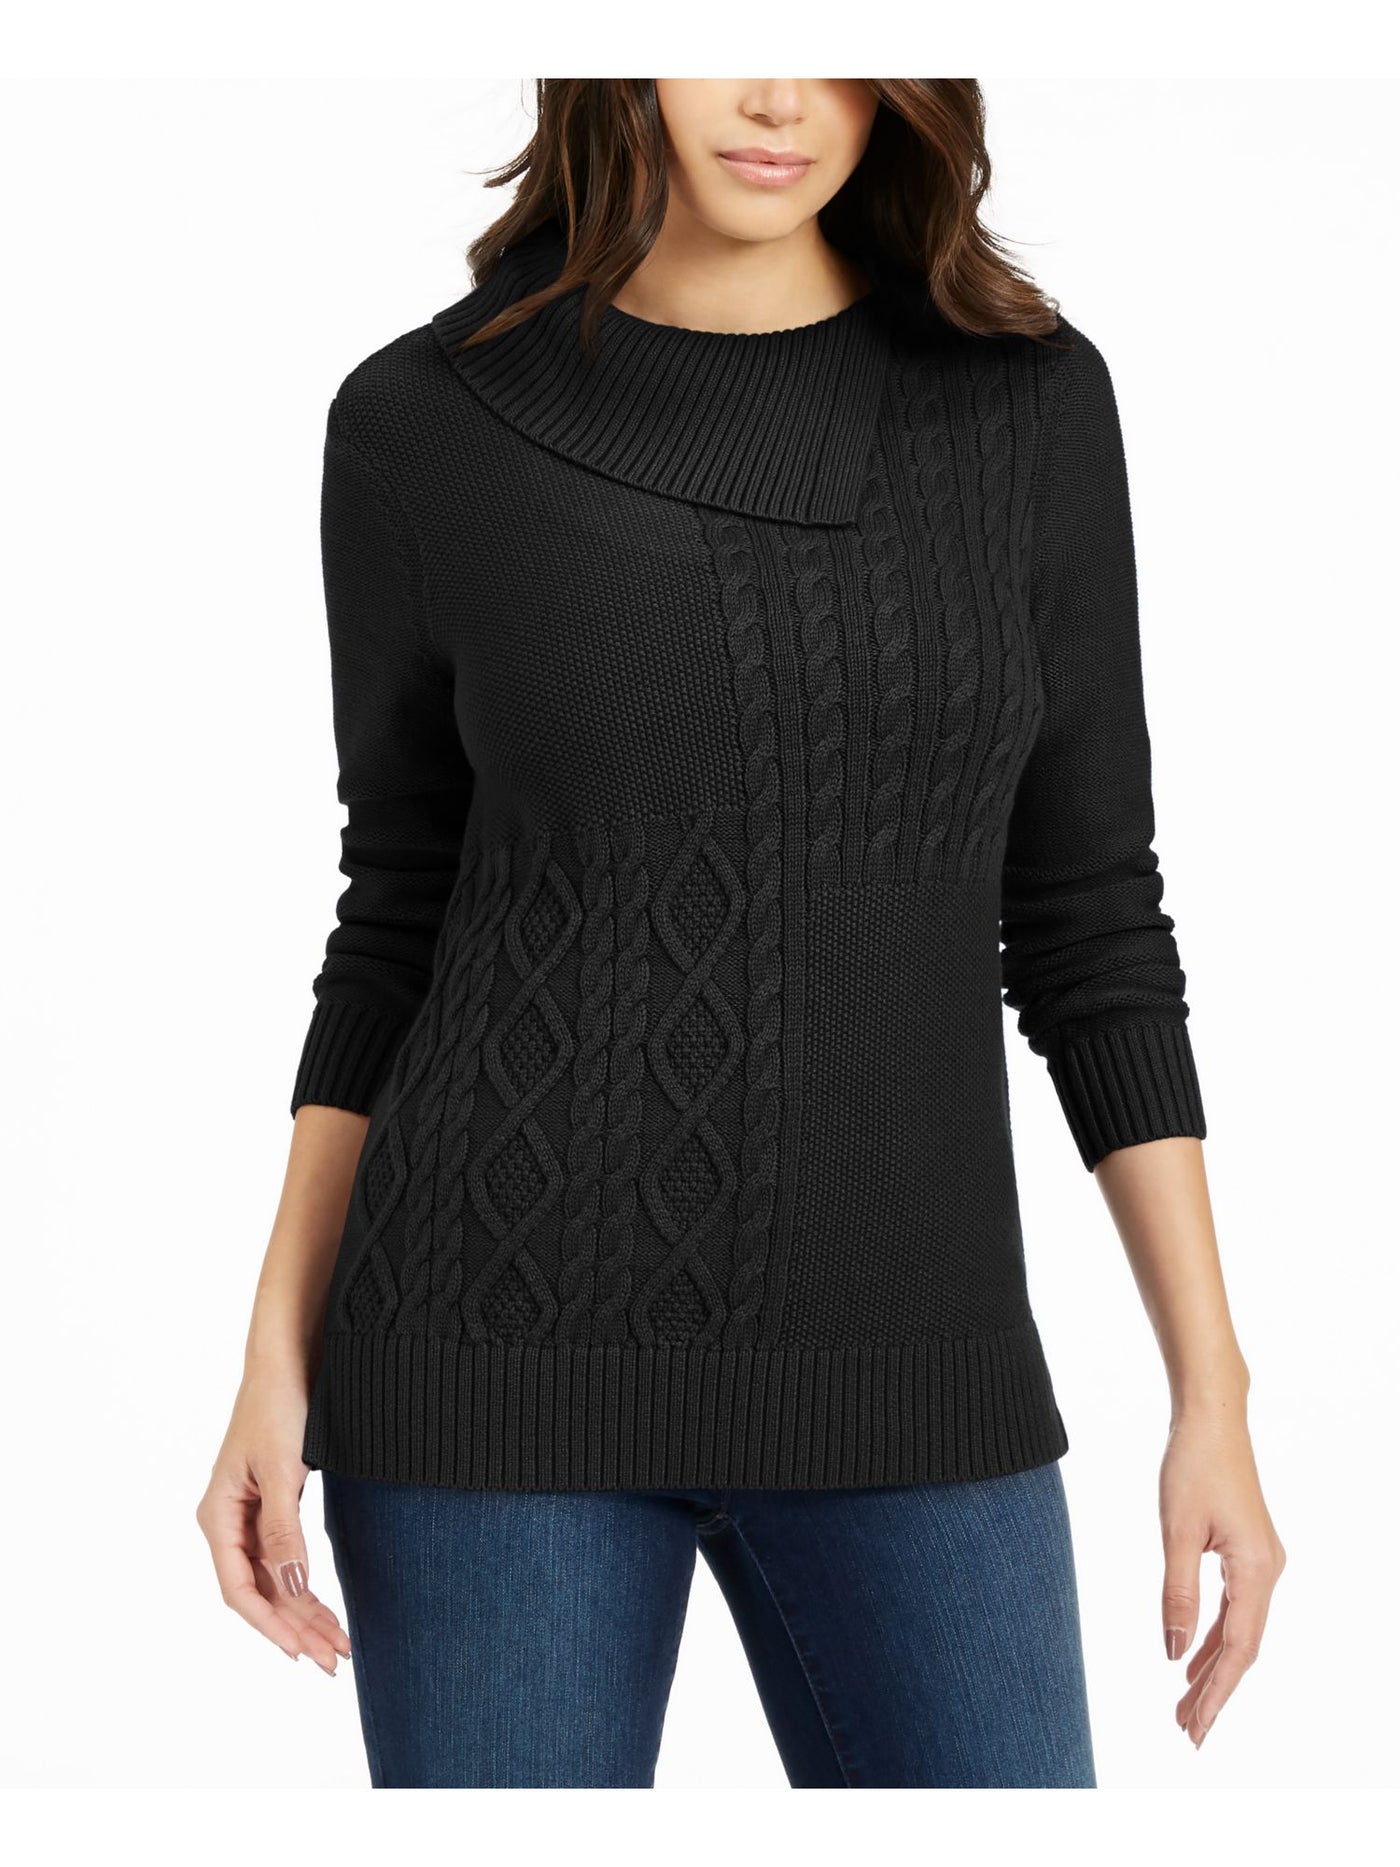 CHARTER CLUB Womens Black Ribbed Heather Long Sleeve Cowl Neck Sweater XS